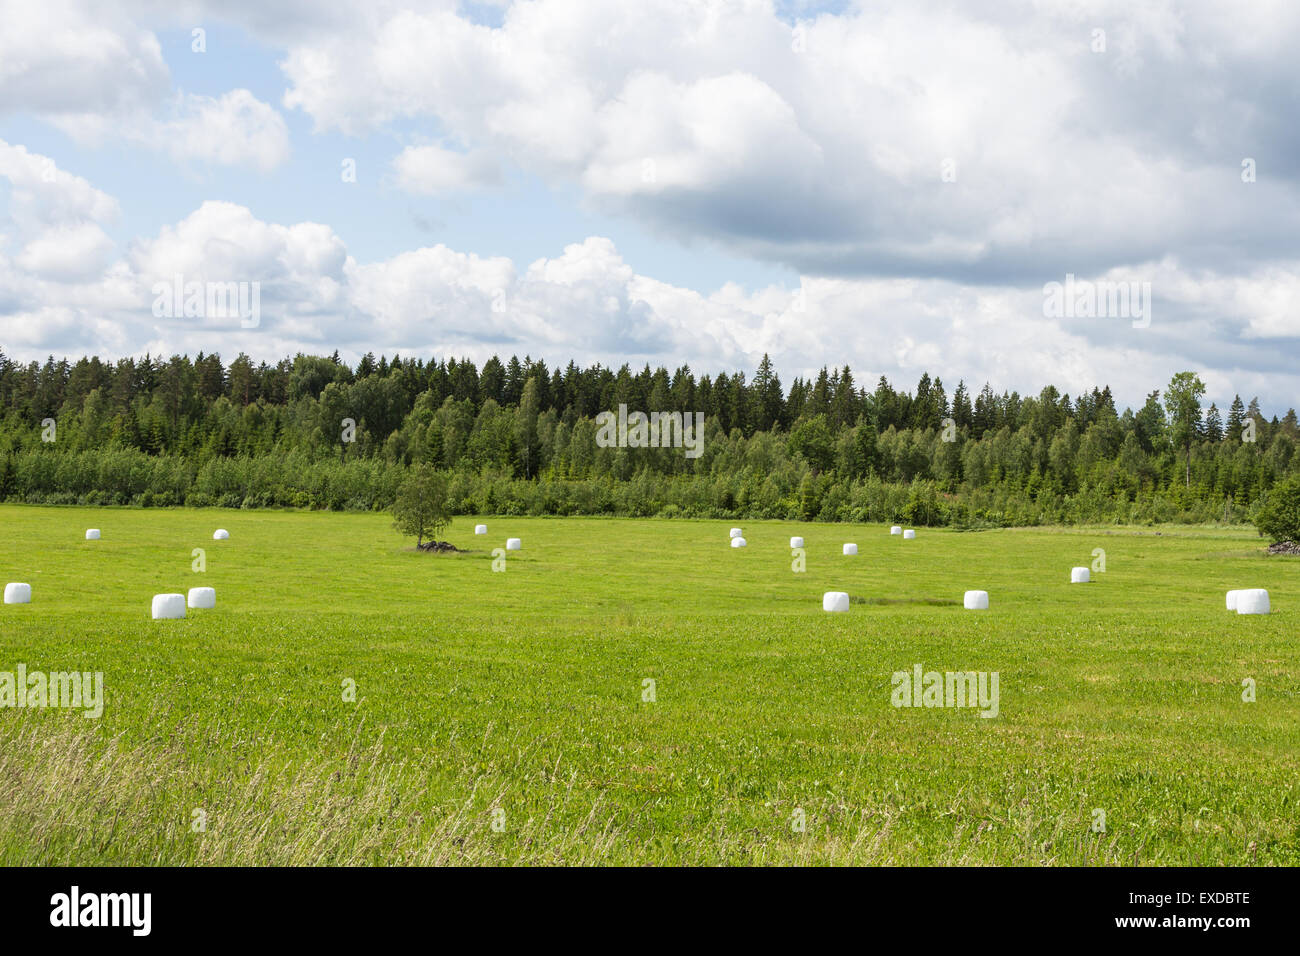 Grass in plastic Silage Balls in Sweden Stock Photo